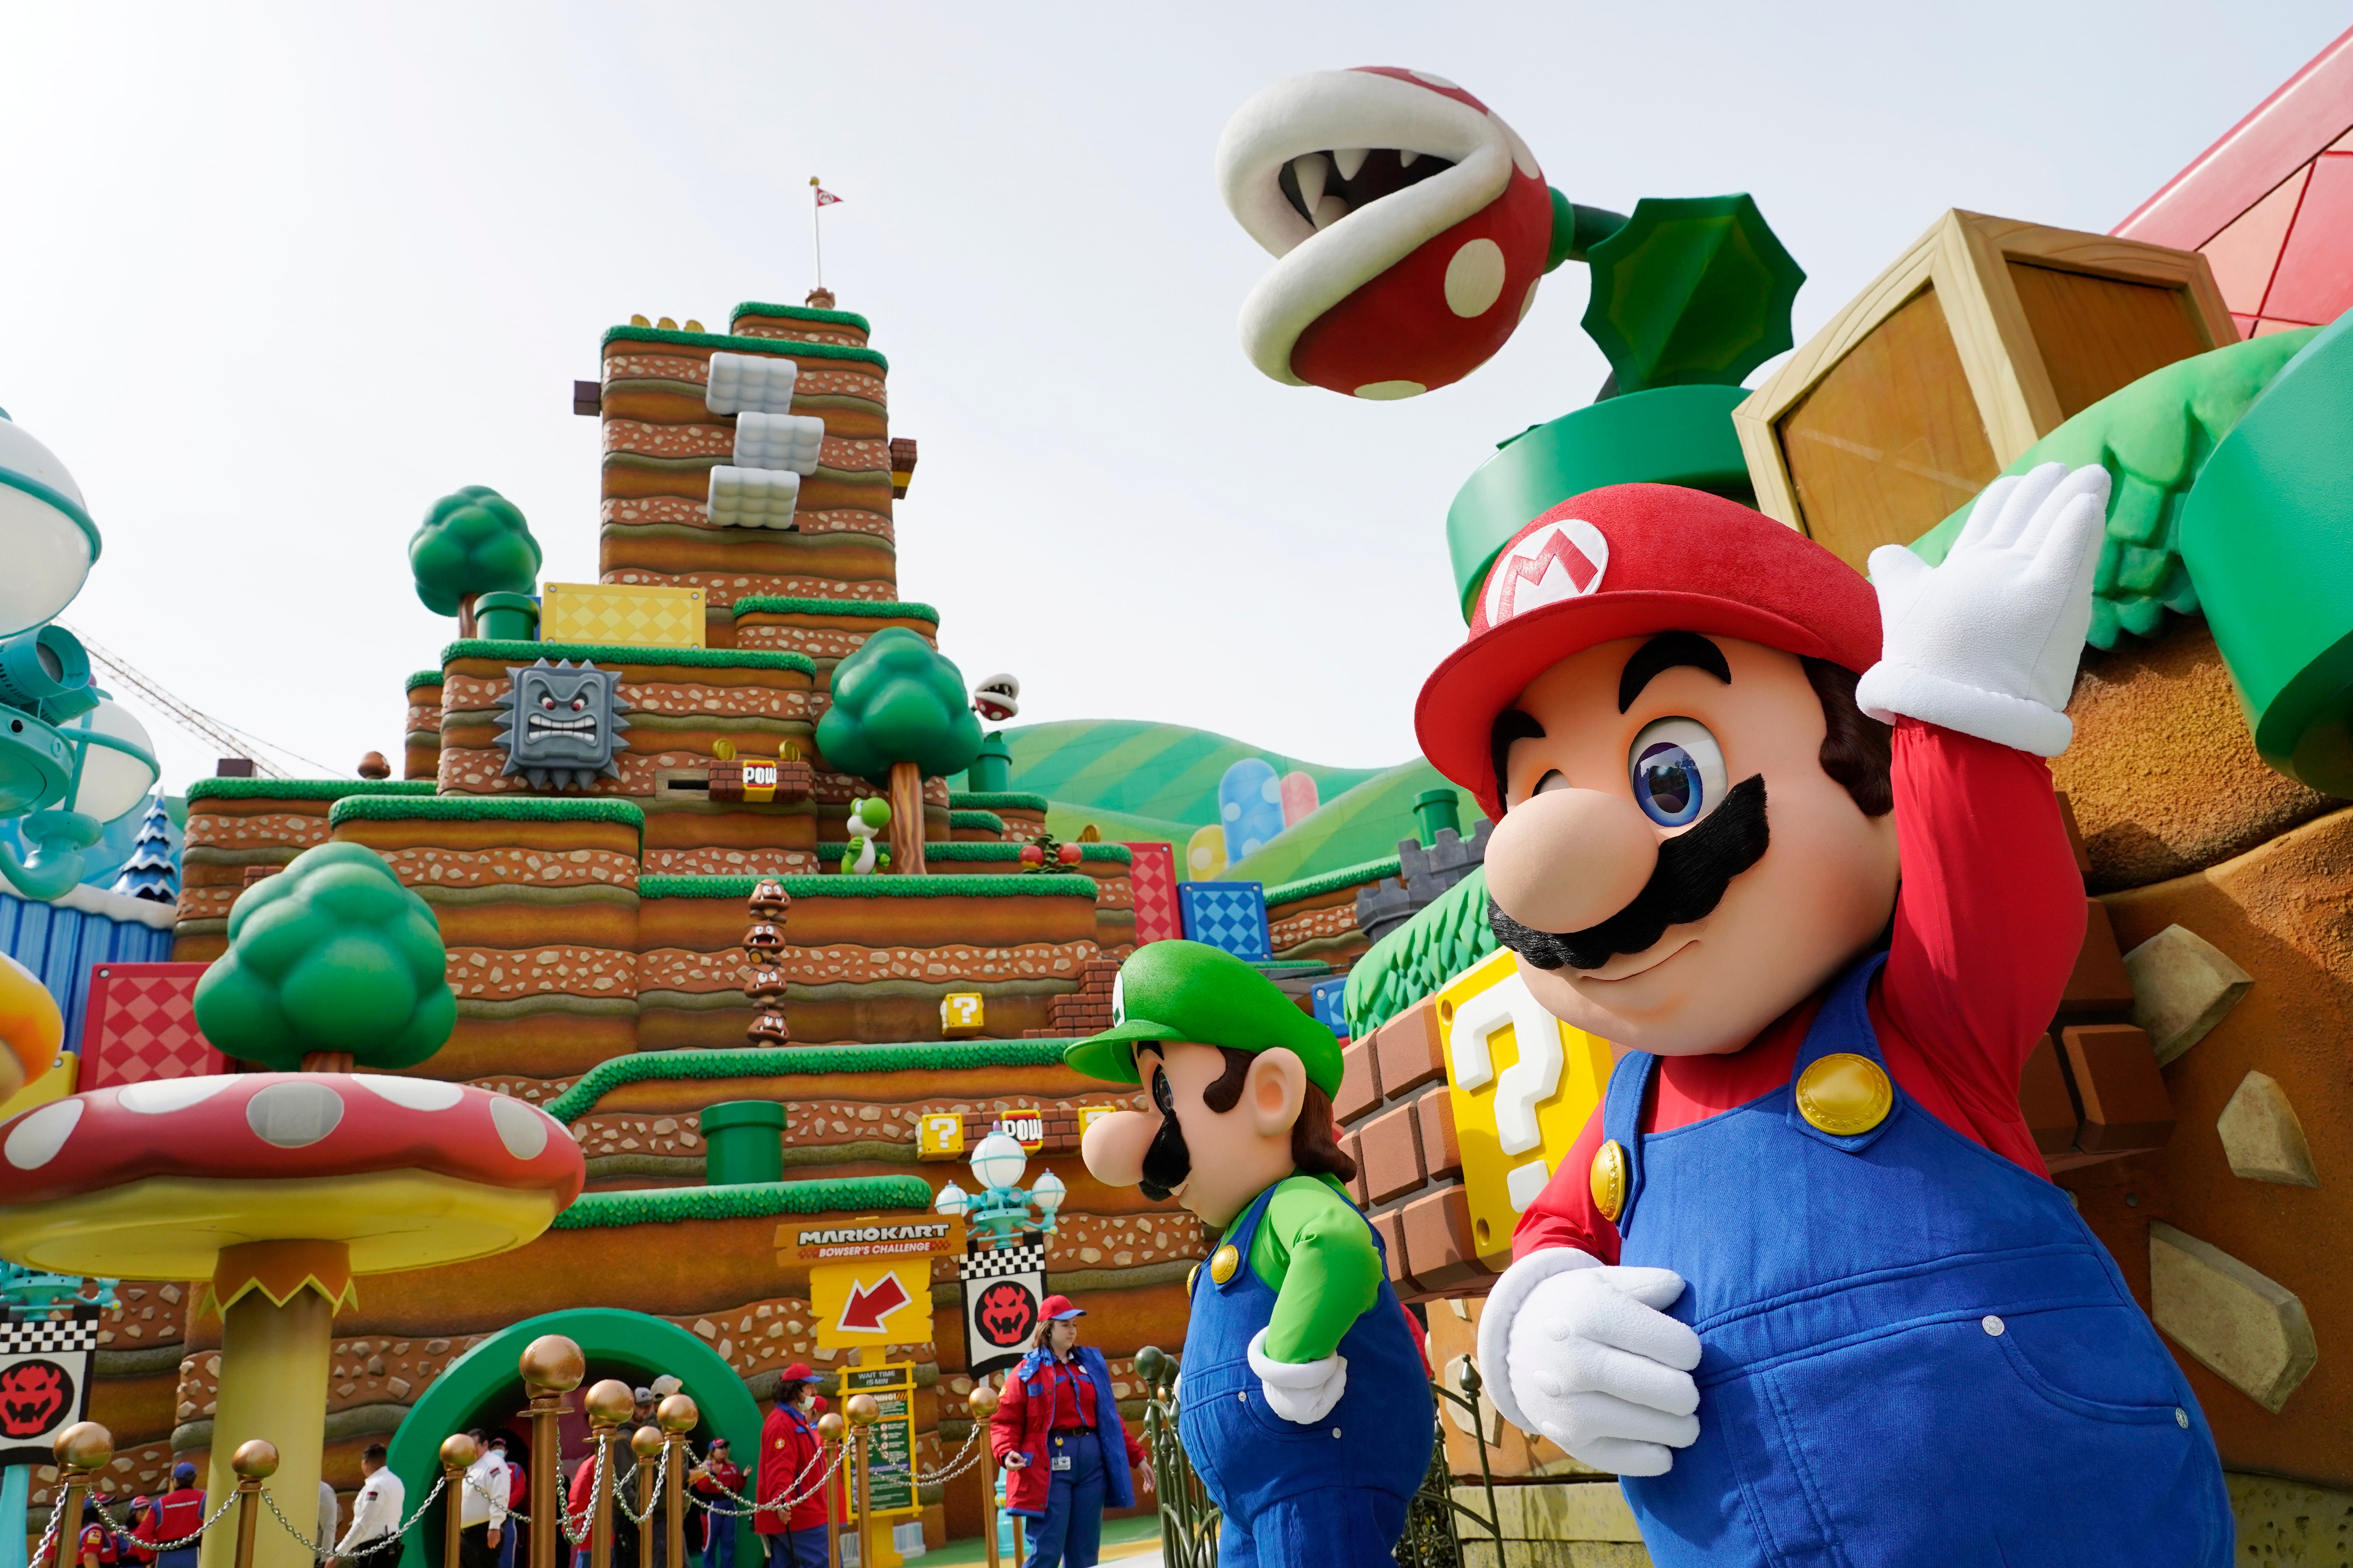 he Nintendo video game characters Mario and Luigi stand in the main plaza of the new Universal Studios in Orlando